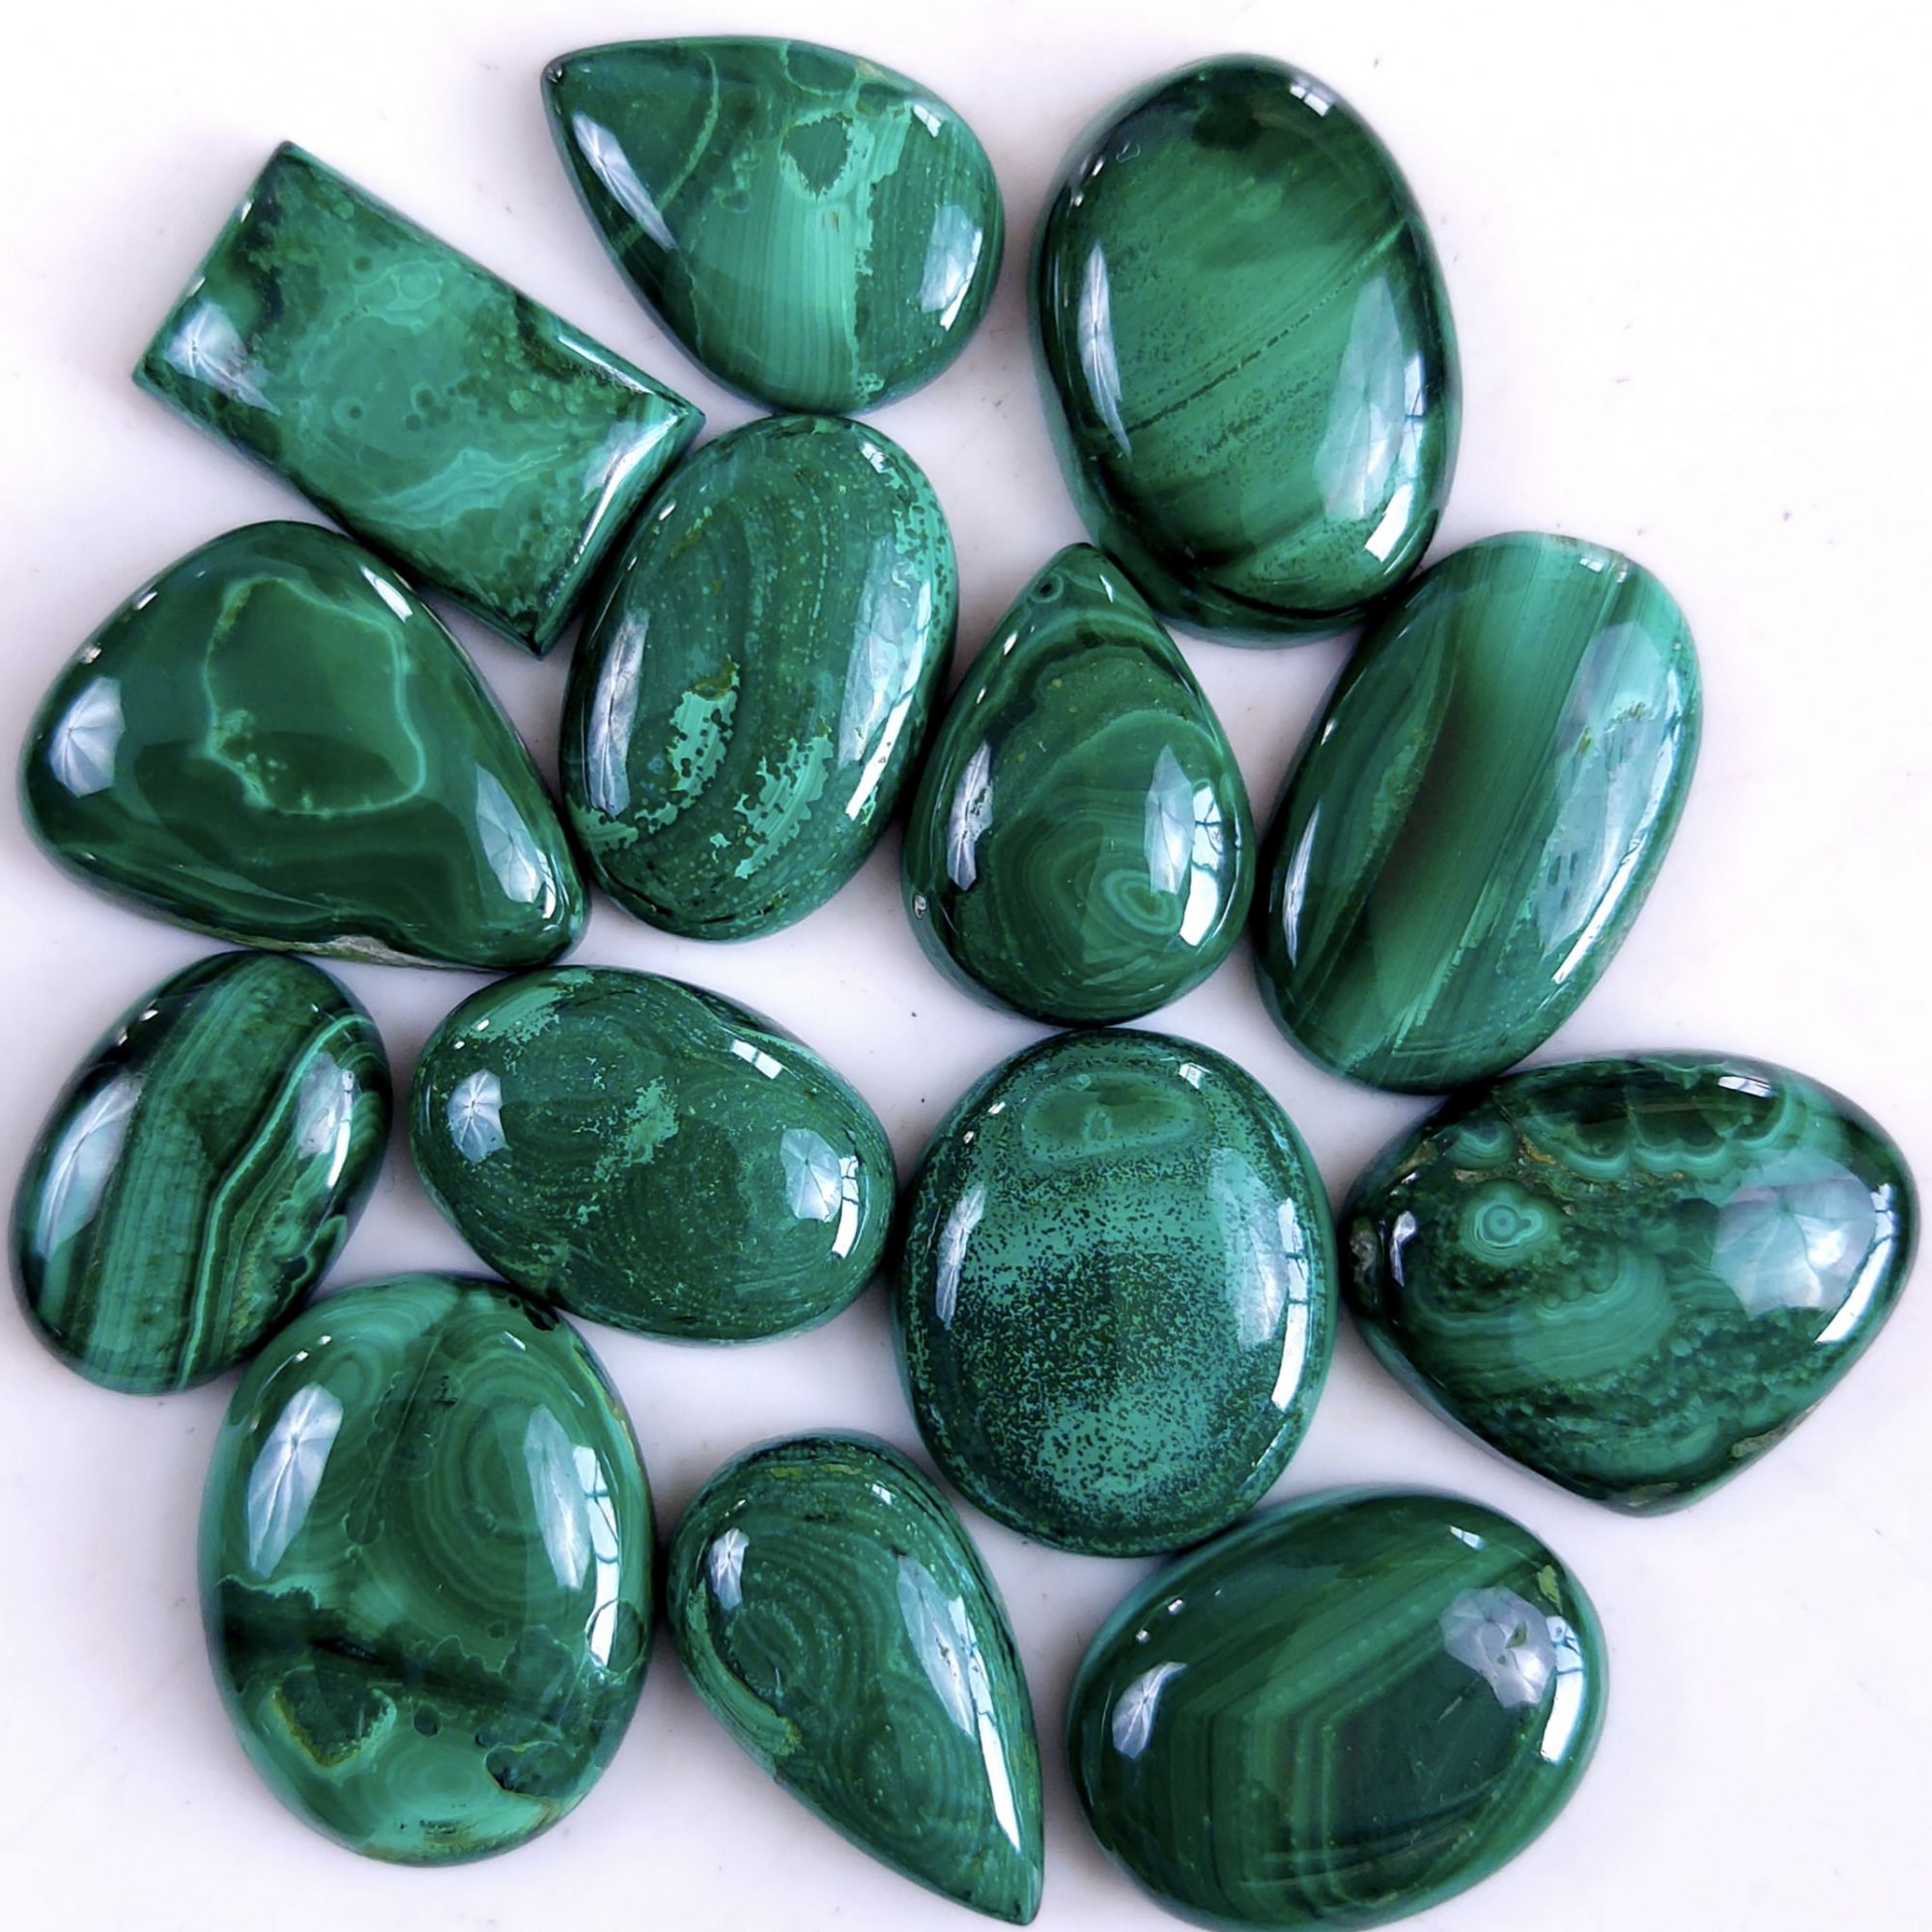 14Pcs 298Cts Natural Green Malachite Flat Back Loose Cabochon Gemstone For Handmade Jewelry Making and Craft Supplies 20x14 16x11mm#9345